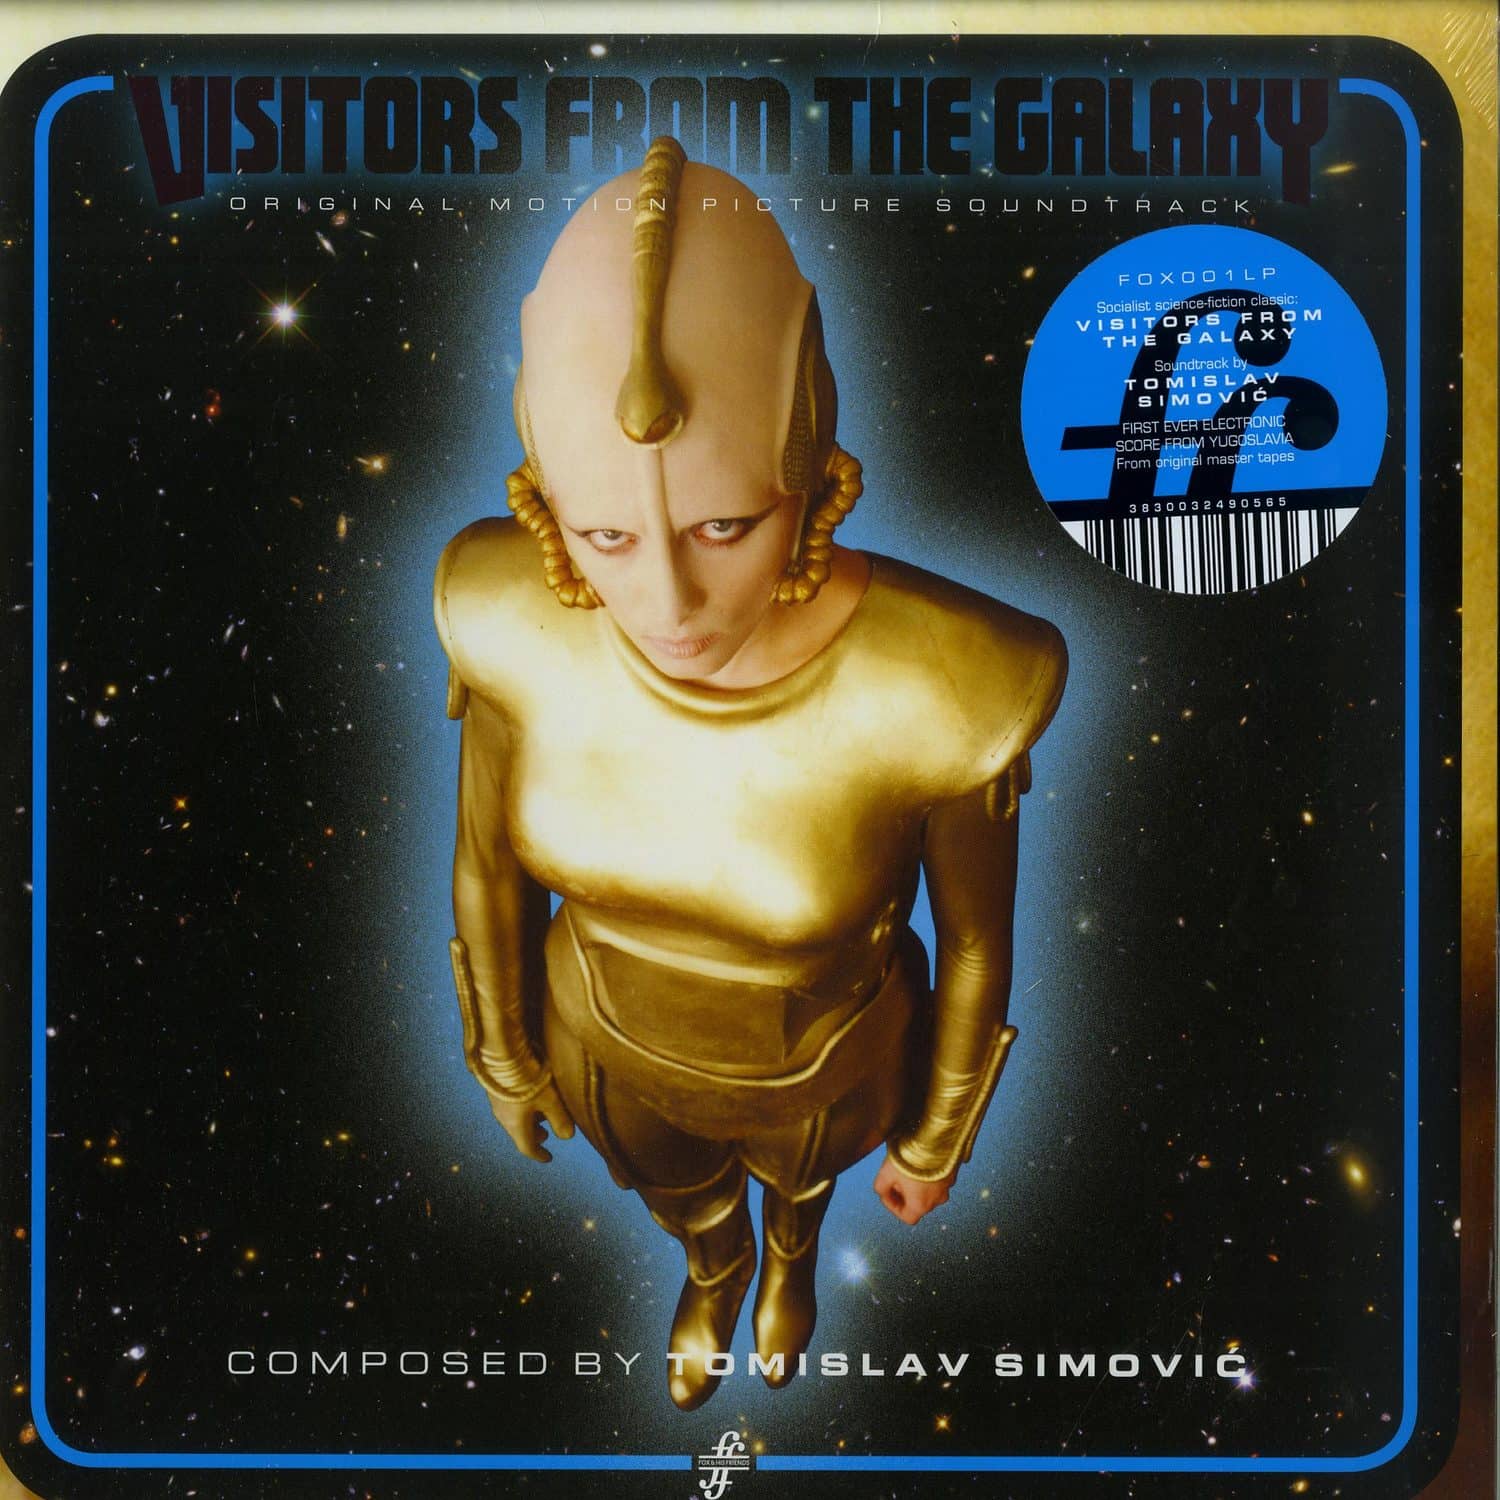 Tomislav Simovic - VISITORS FROM THE GALAXY O.S.T. 